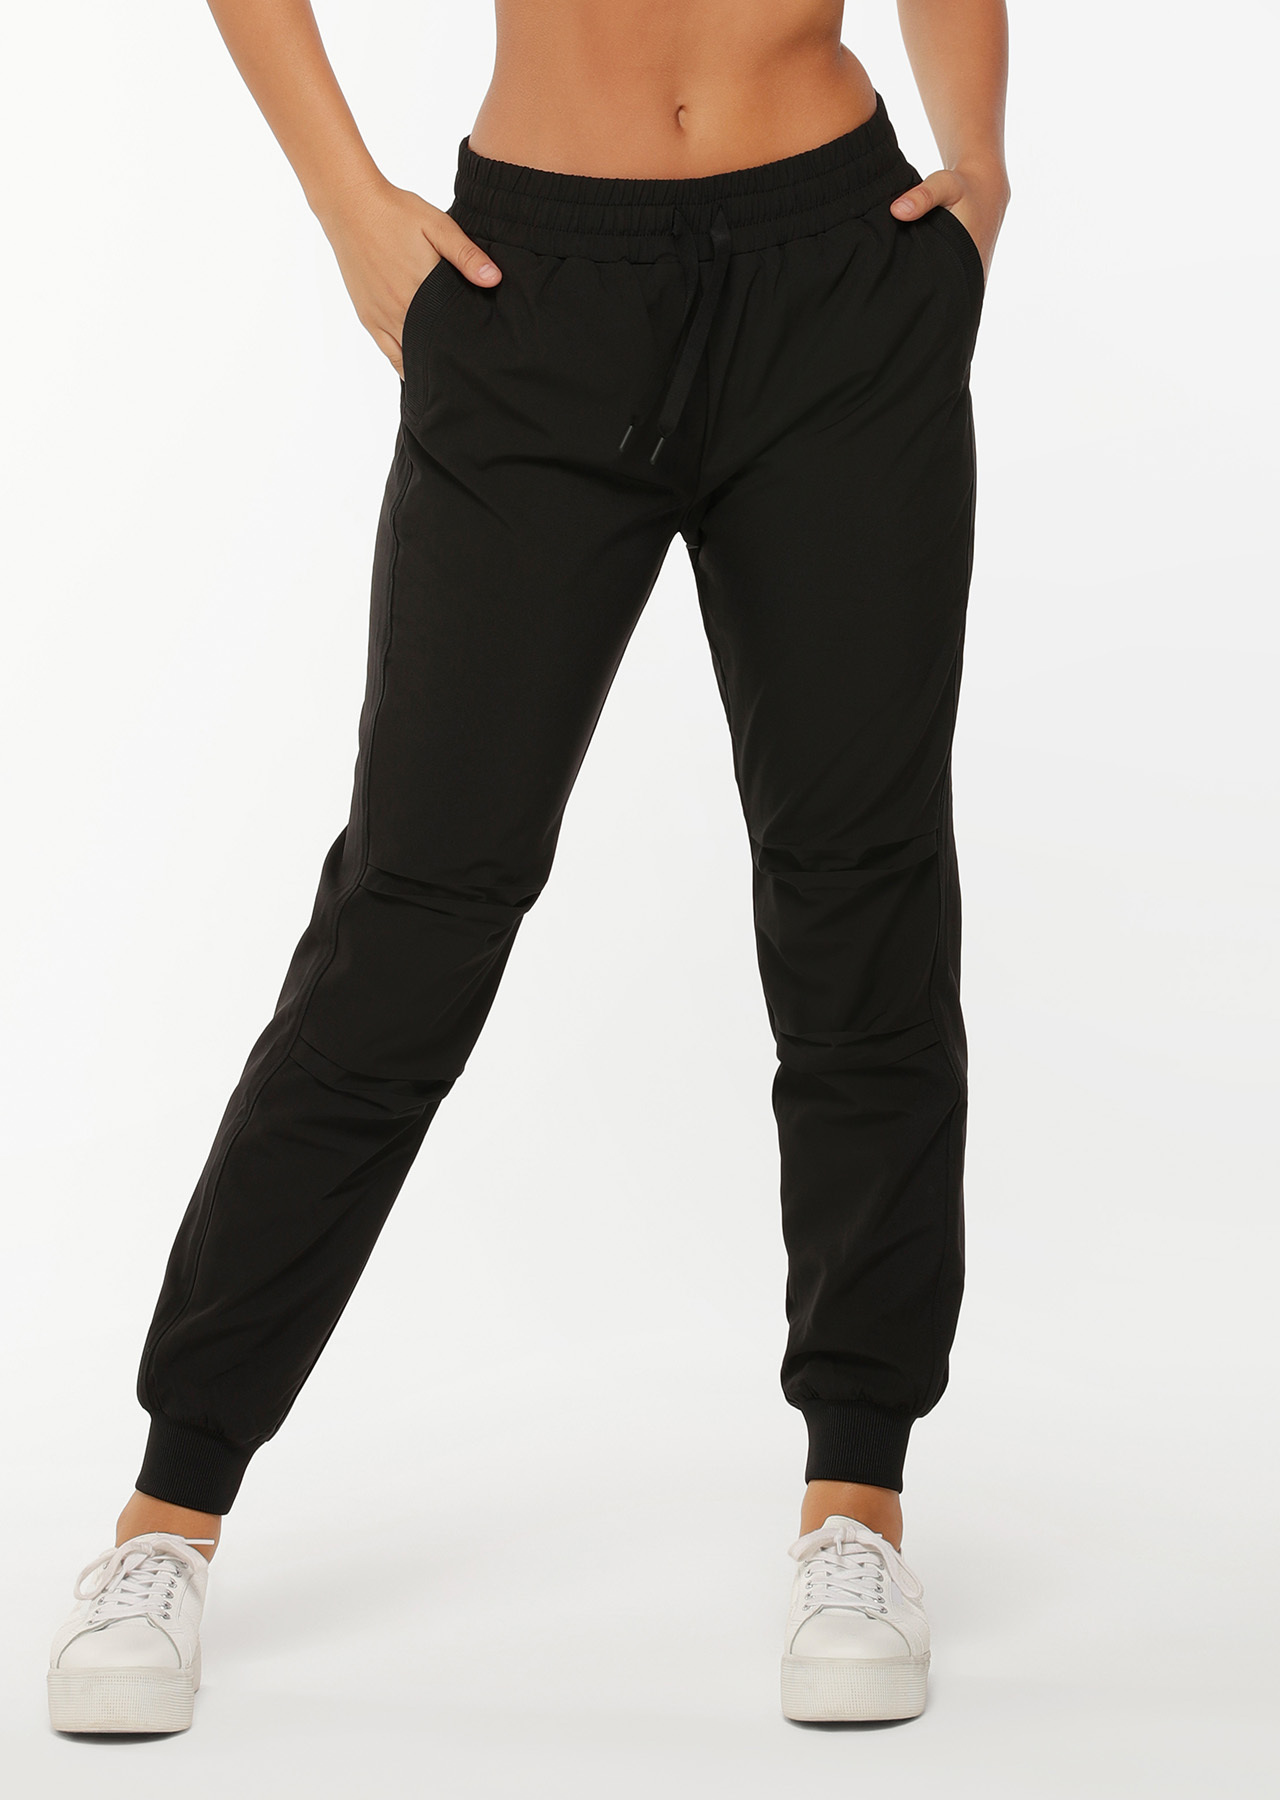 Shop Everyday Winter Thermal Pant, Black